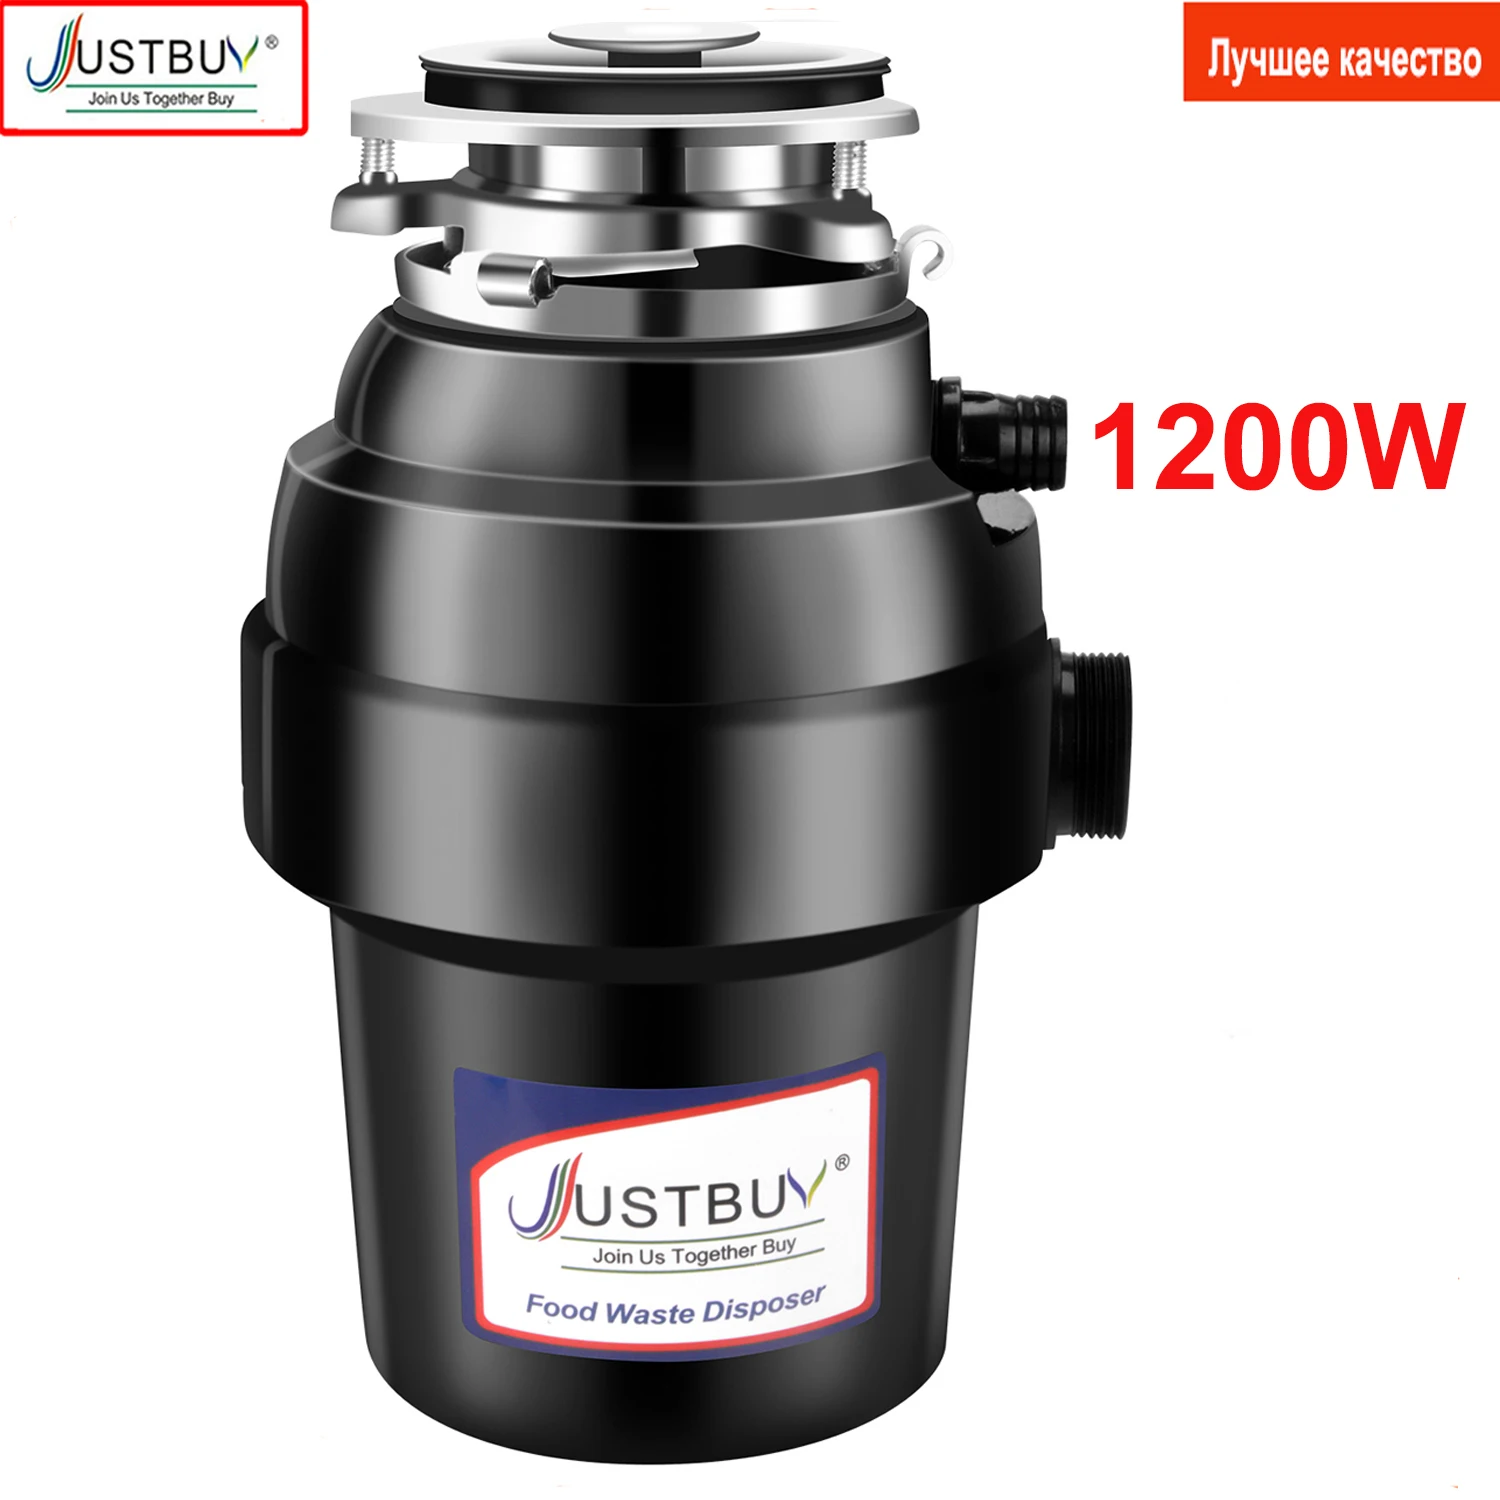 1200W/750W Food Waste Disposers Chopper Kitchen Garbage Disposal Stainless Steel Grinder material